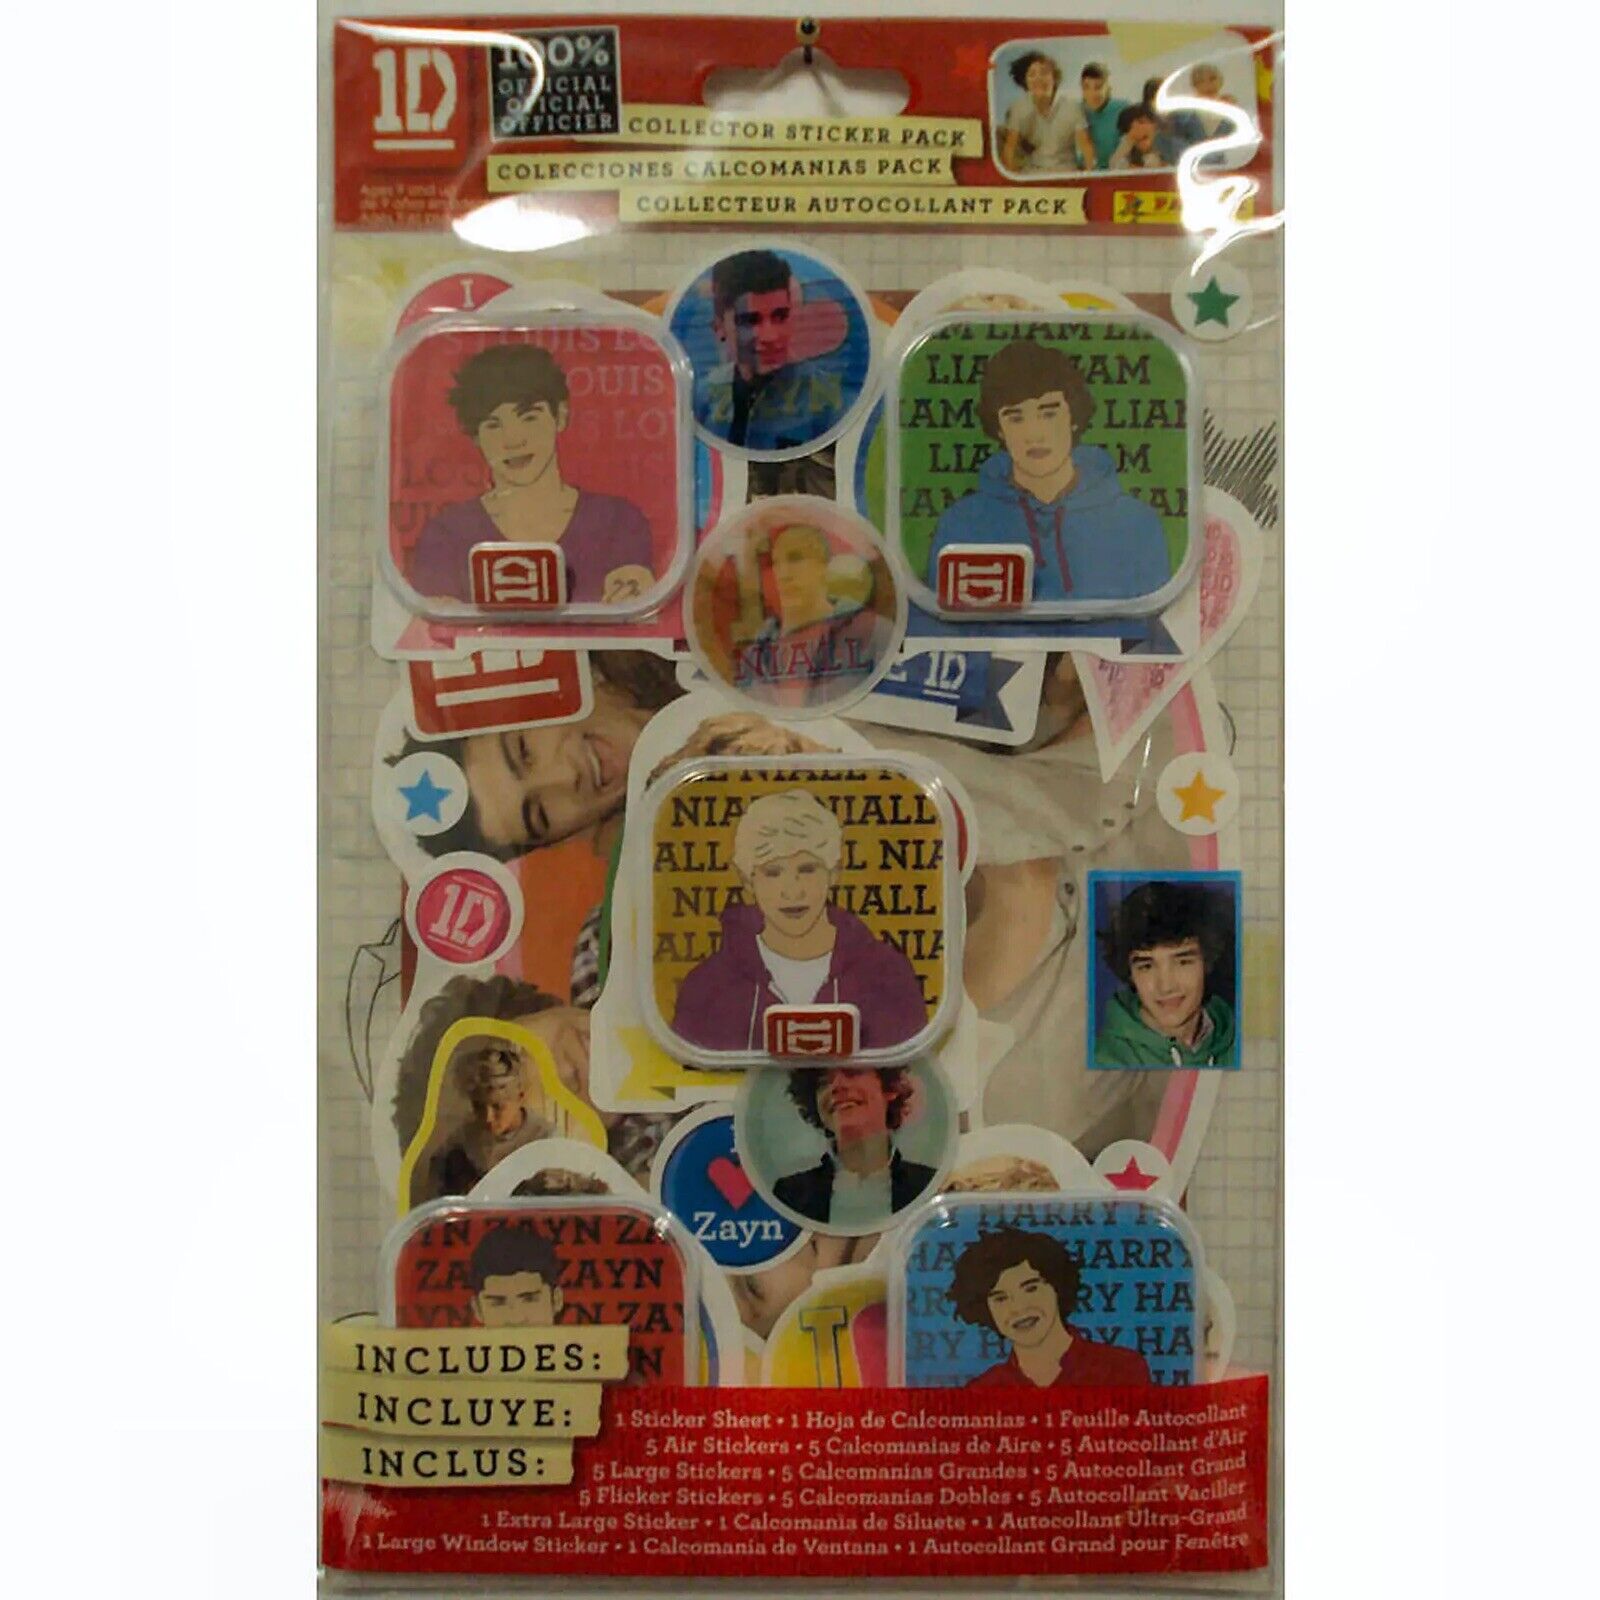 2012 Panini One Direction 1D Collector Sticker Pack  Full Case 140 Packs NEW